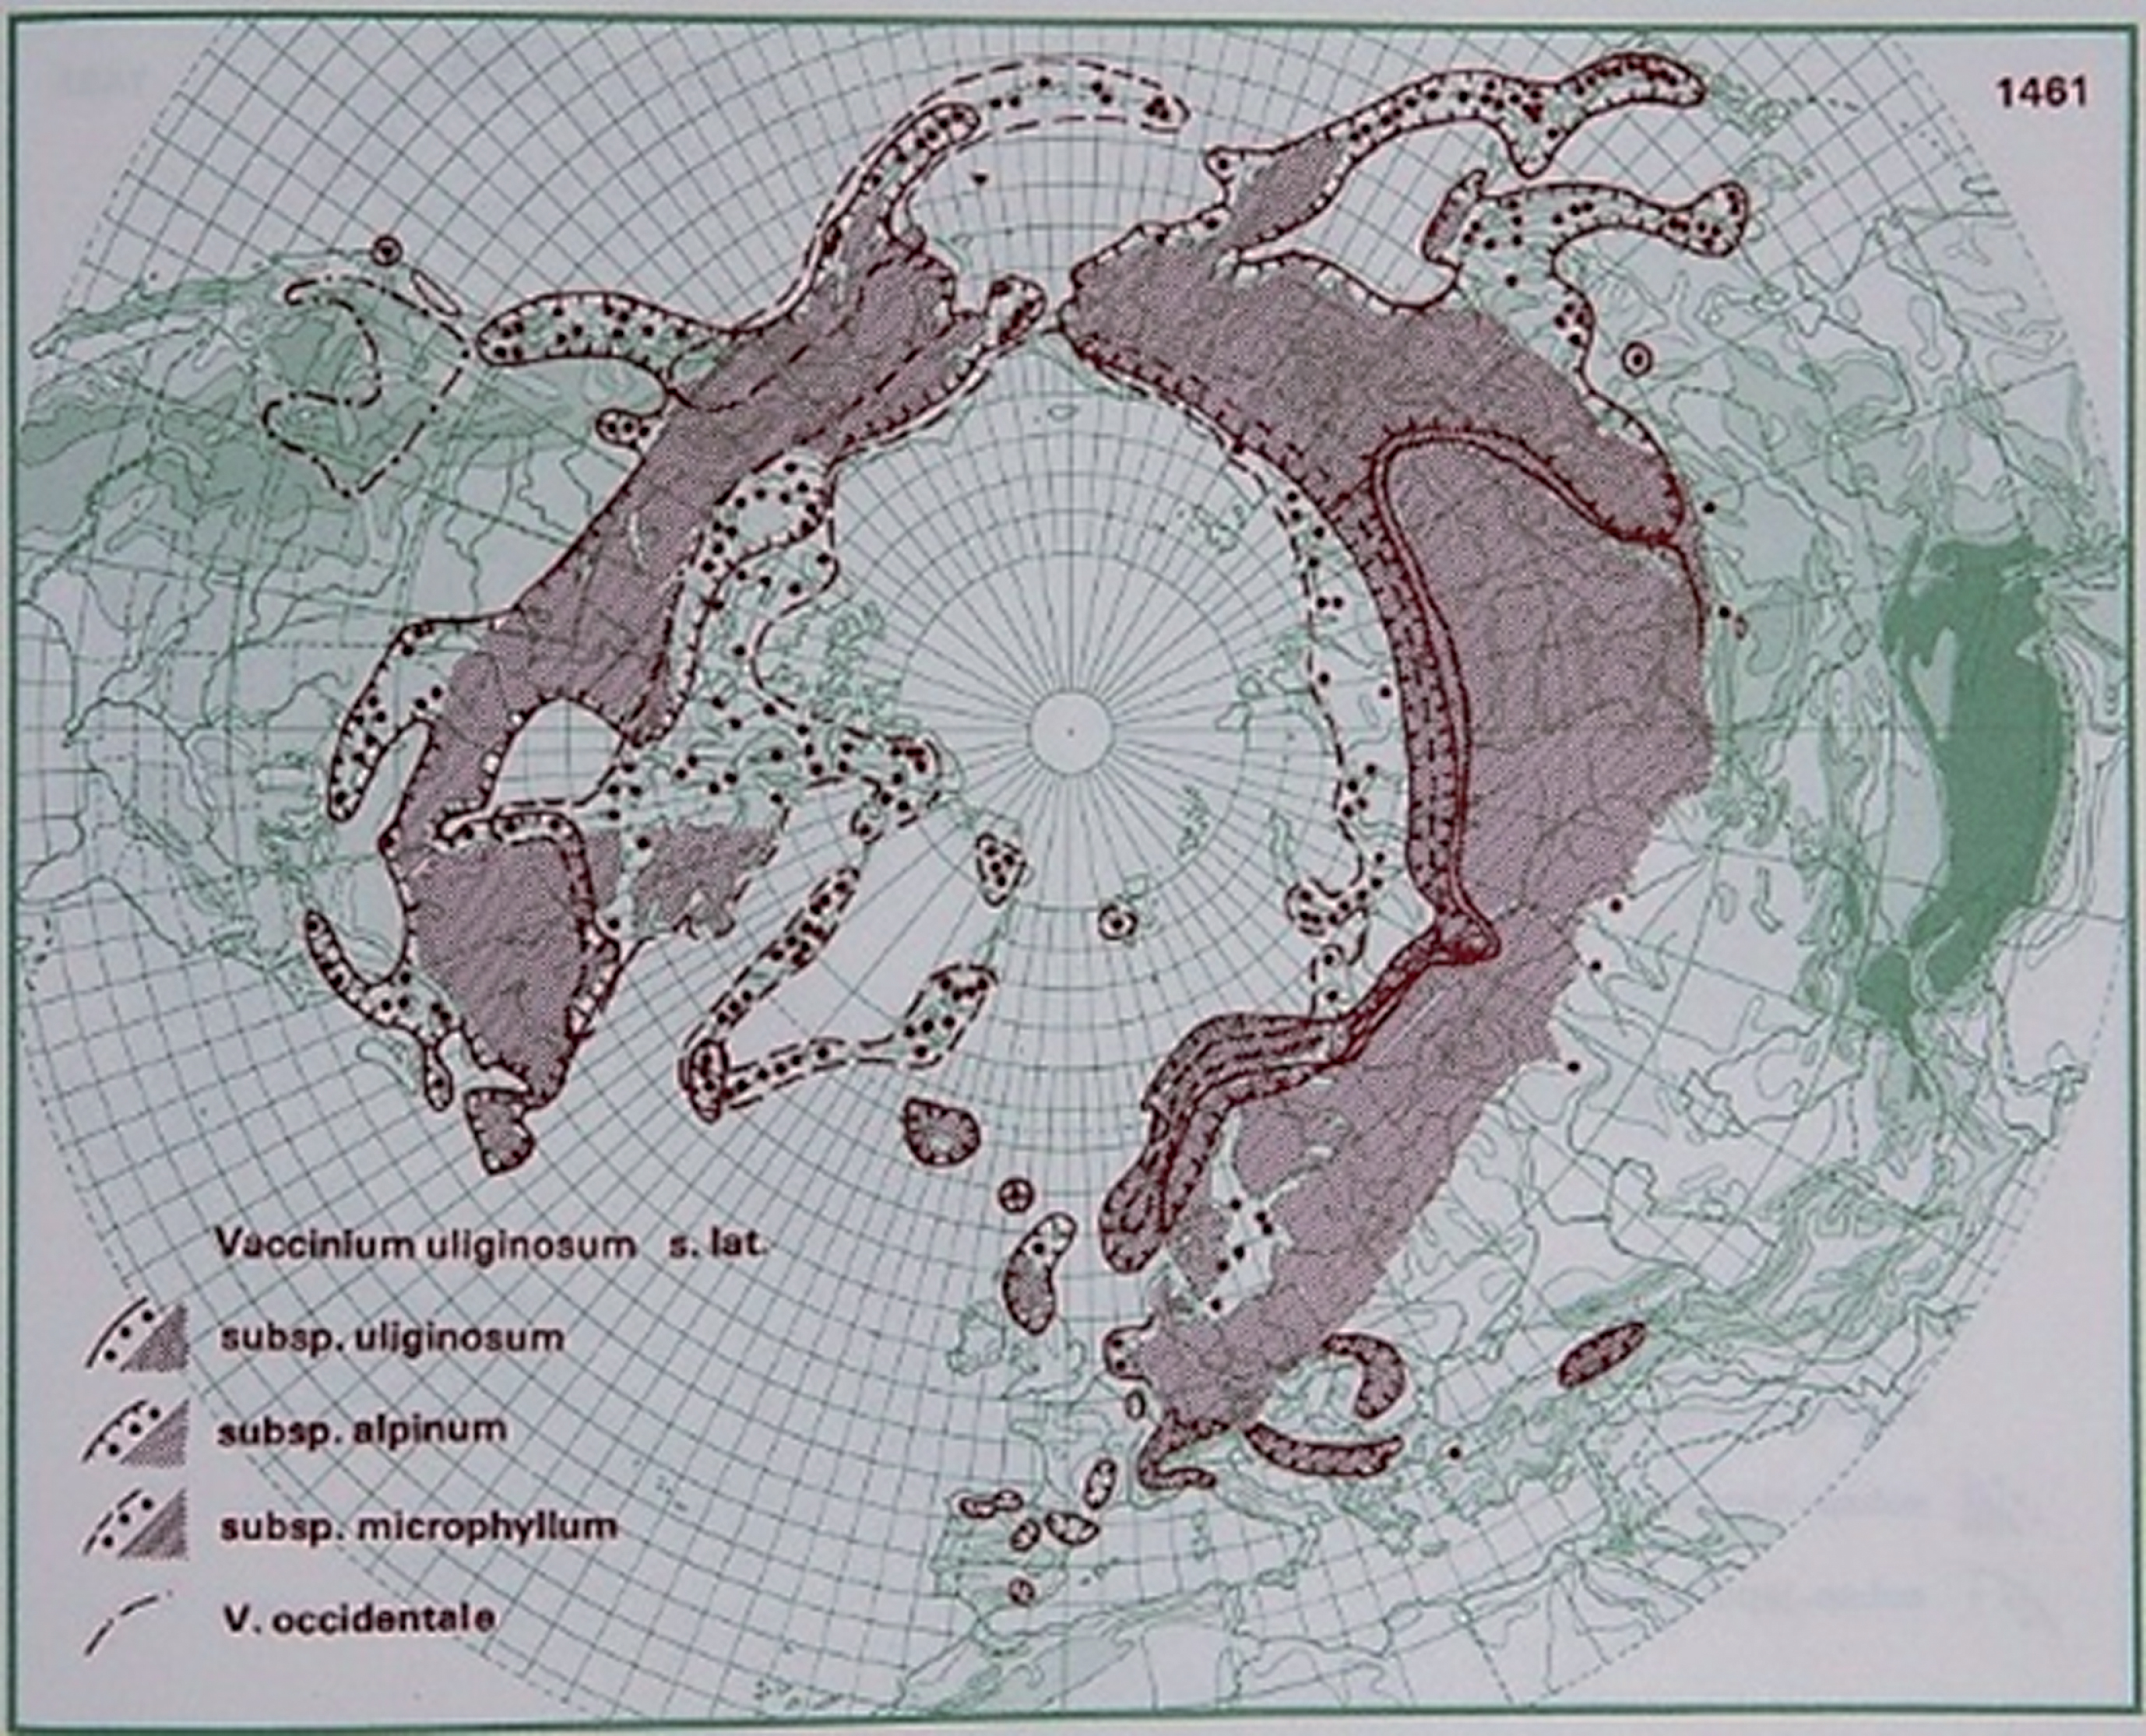 Distribution of V. uliginosum L. in the northern hemisphere (Hultén and Fries 1986), with the kind permission of Per Koeltz.